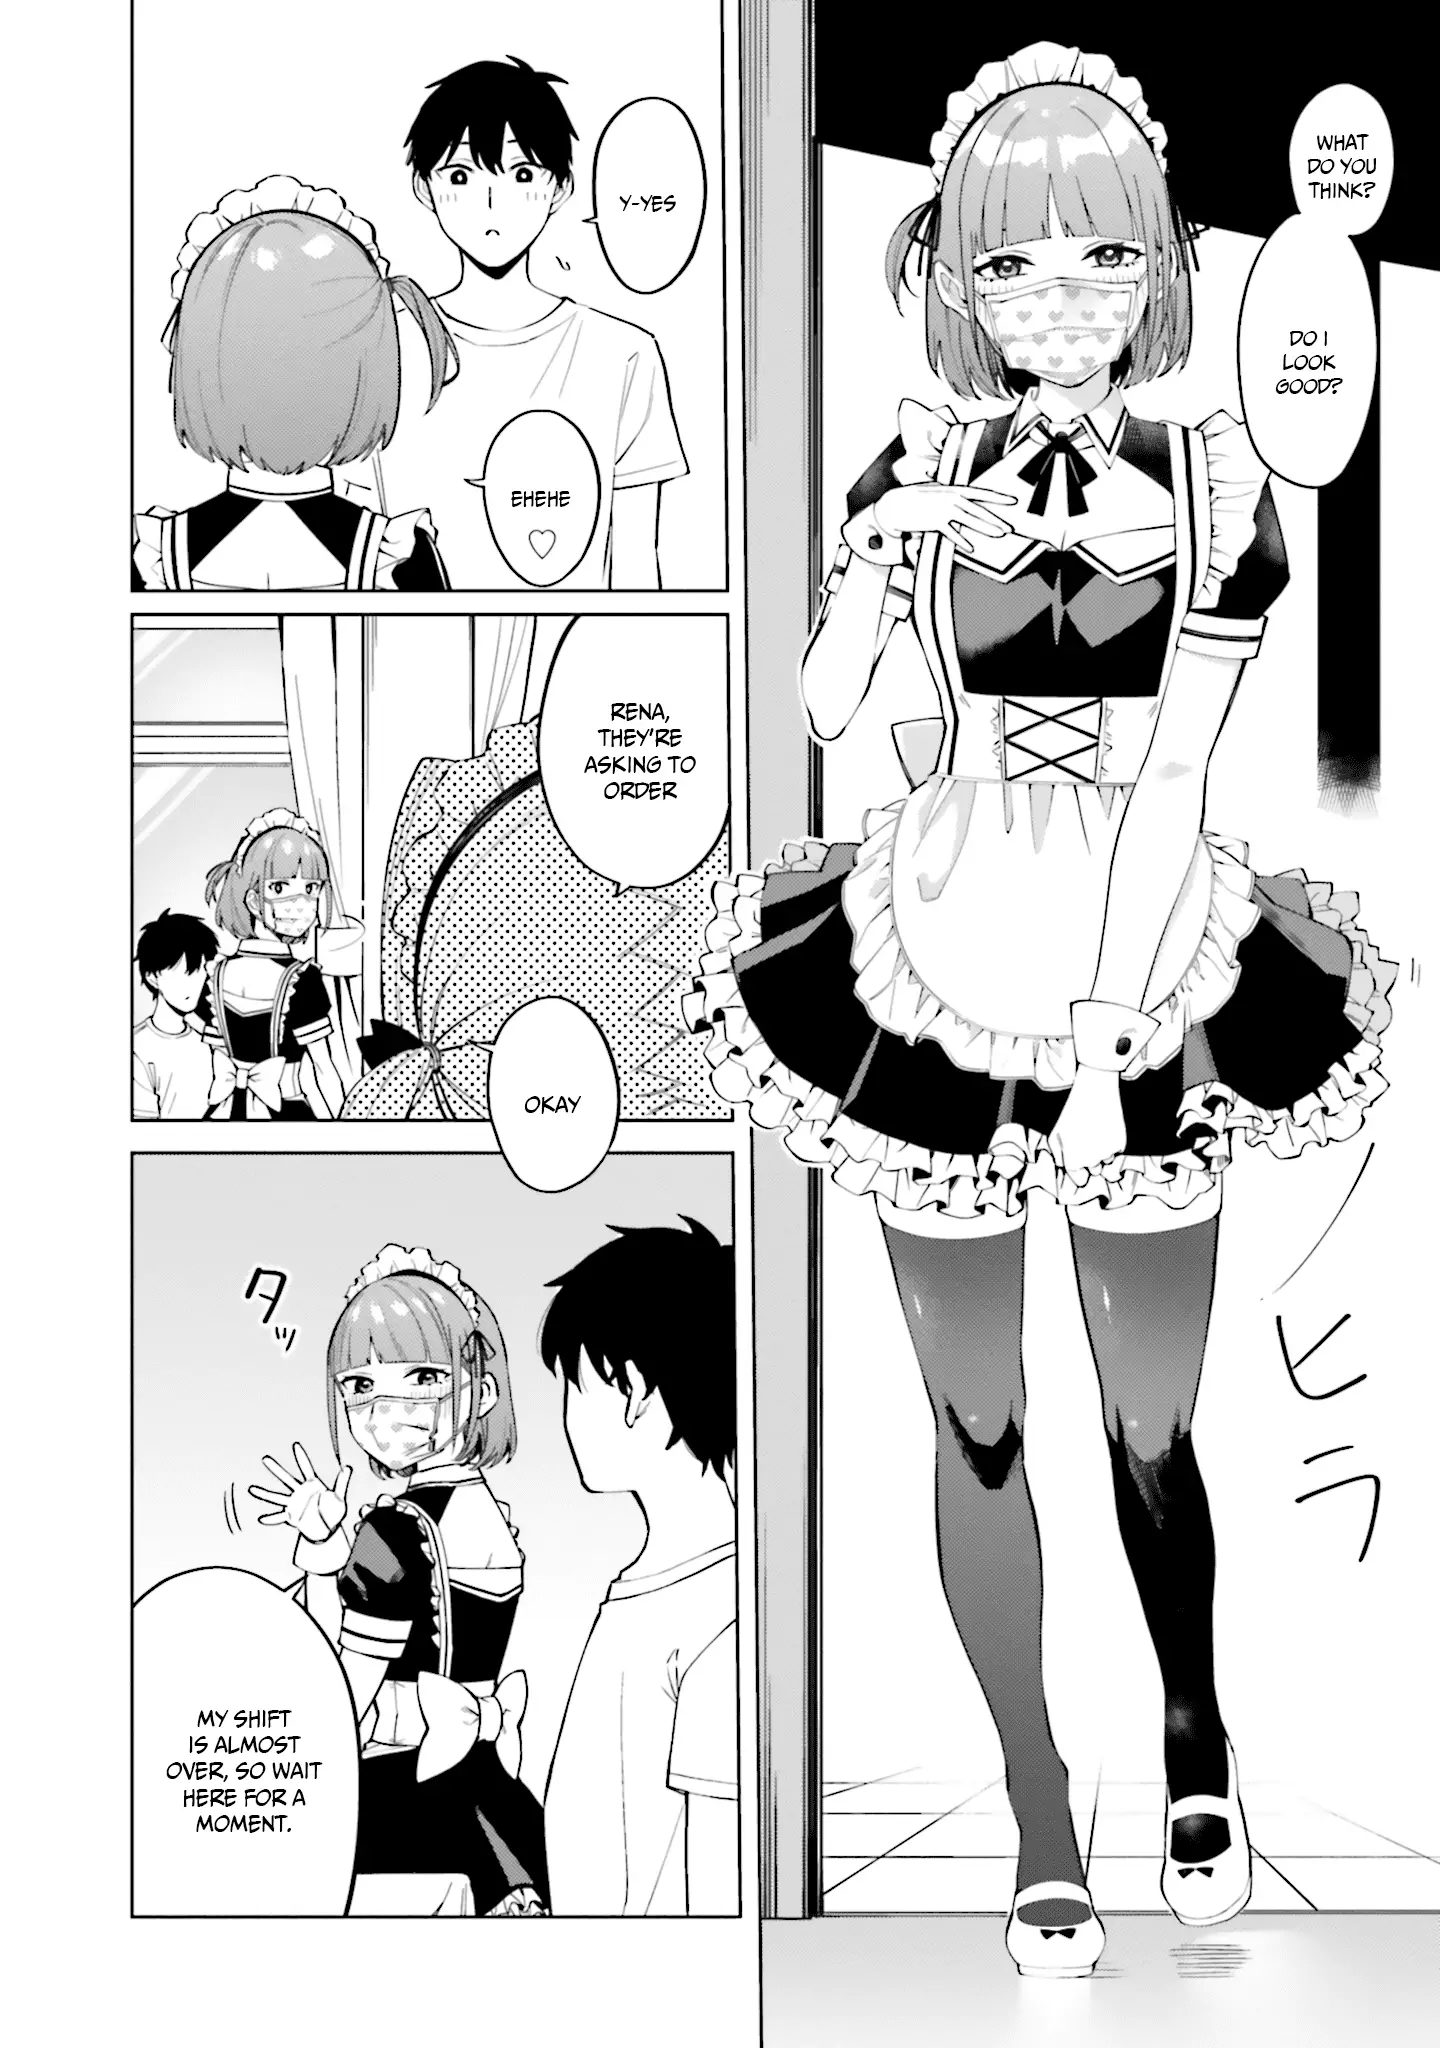 I Don't Understand Shirogane-San's Facial Expression At All - 15 page 11-af7053f1